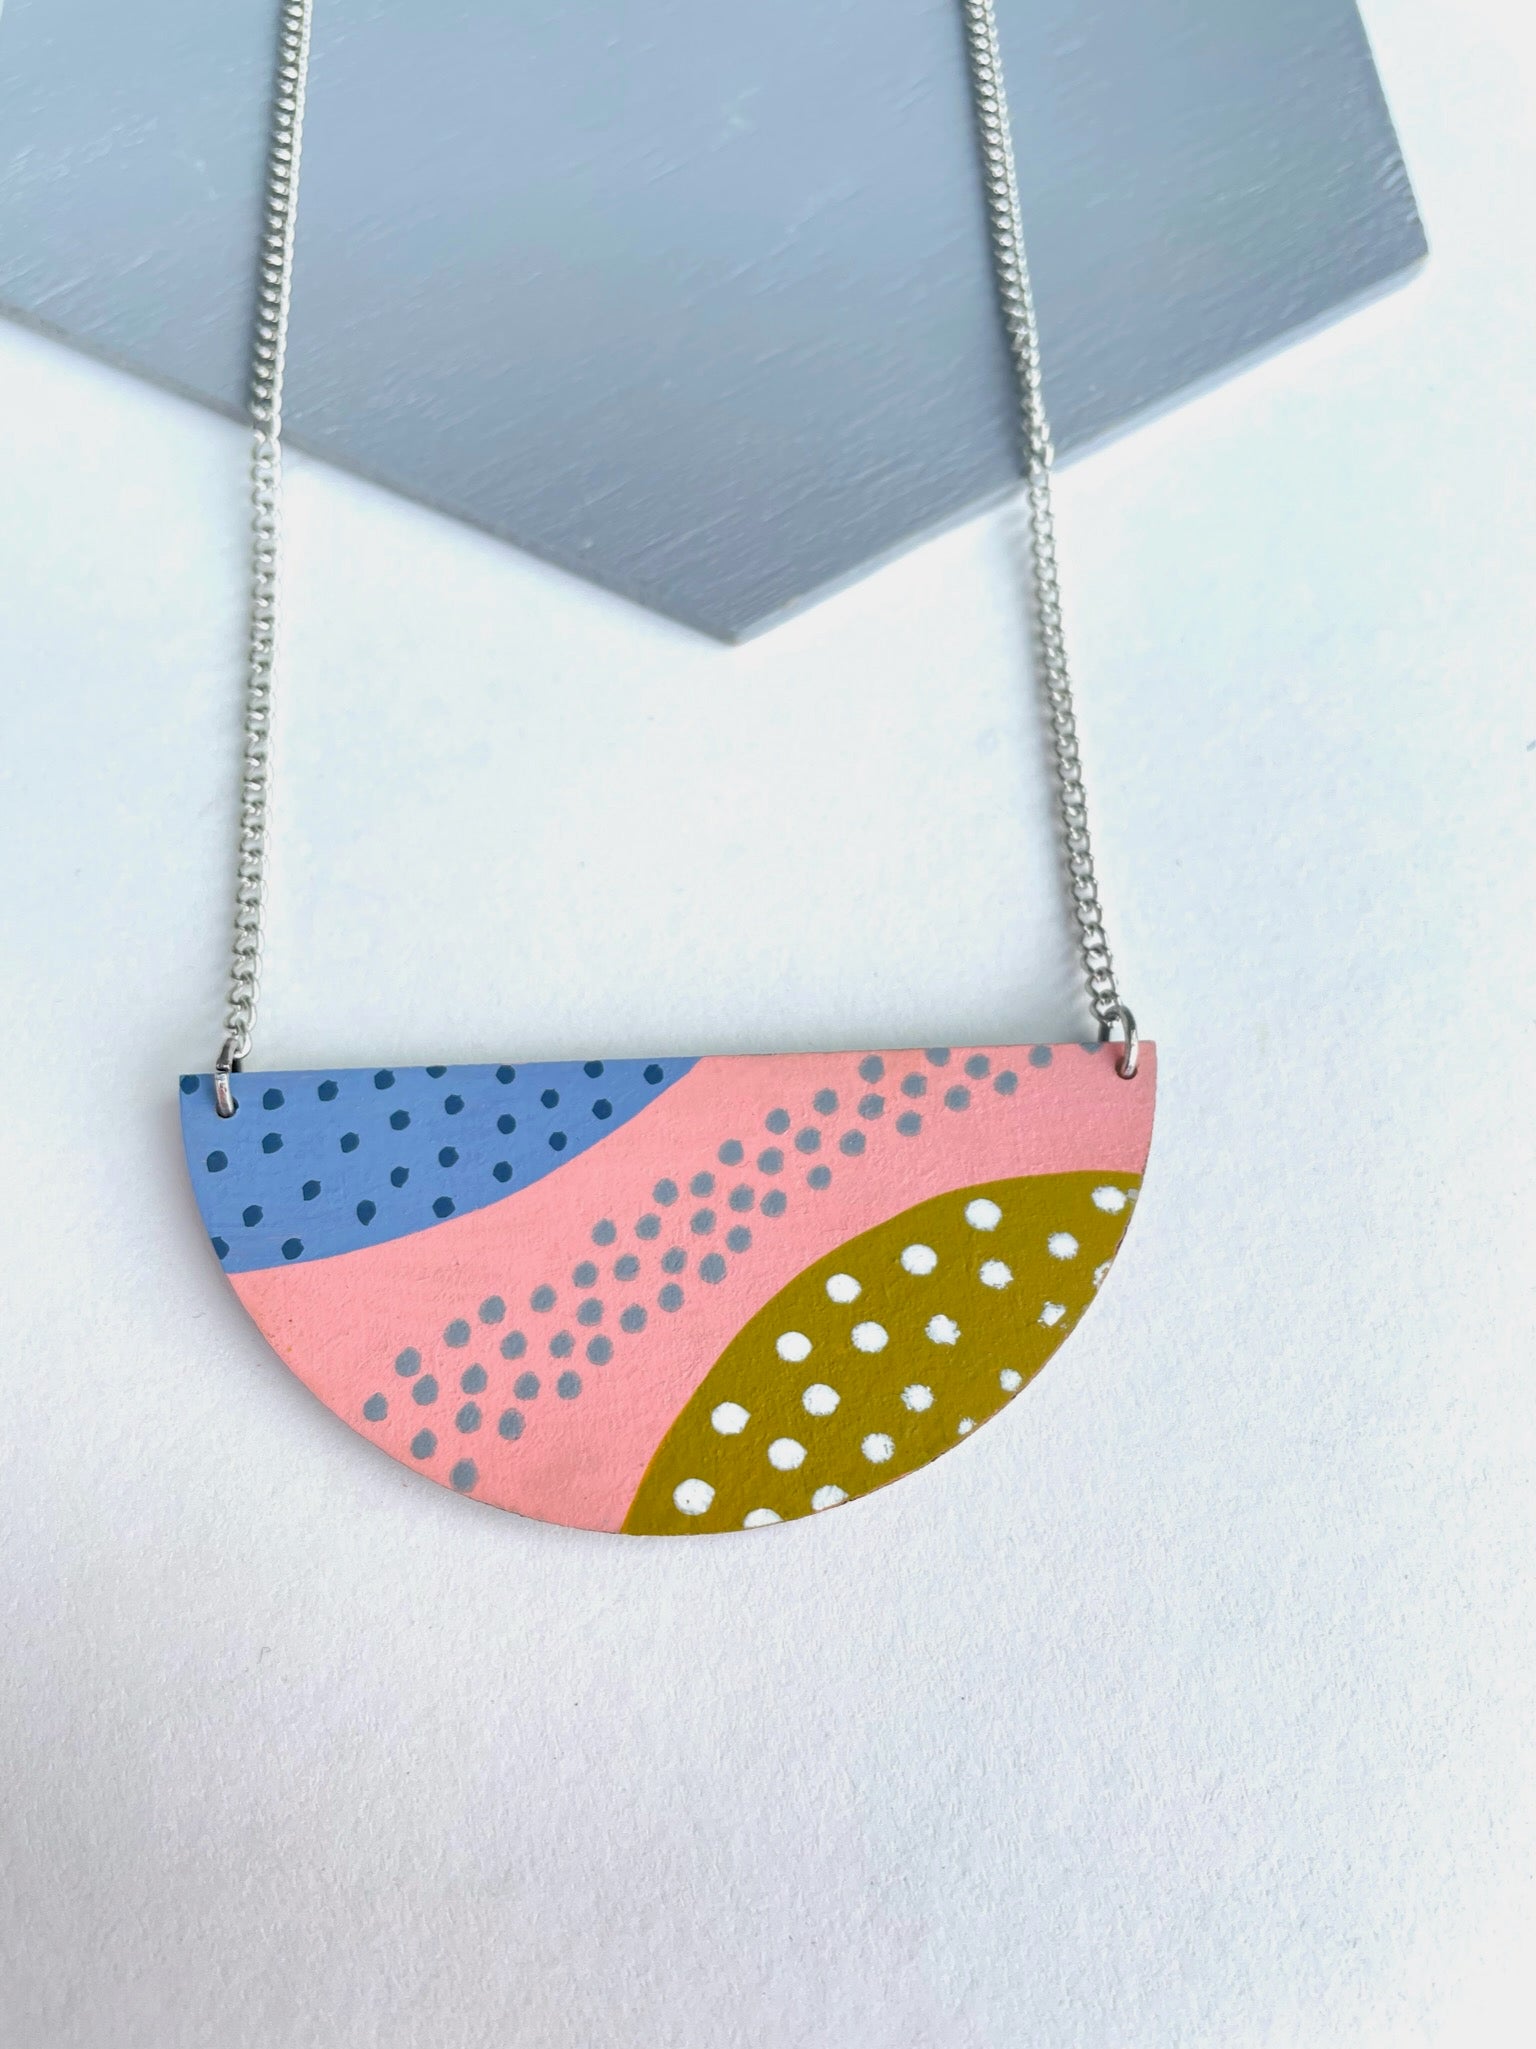 painted necklace